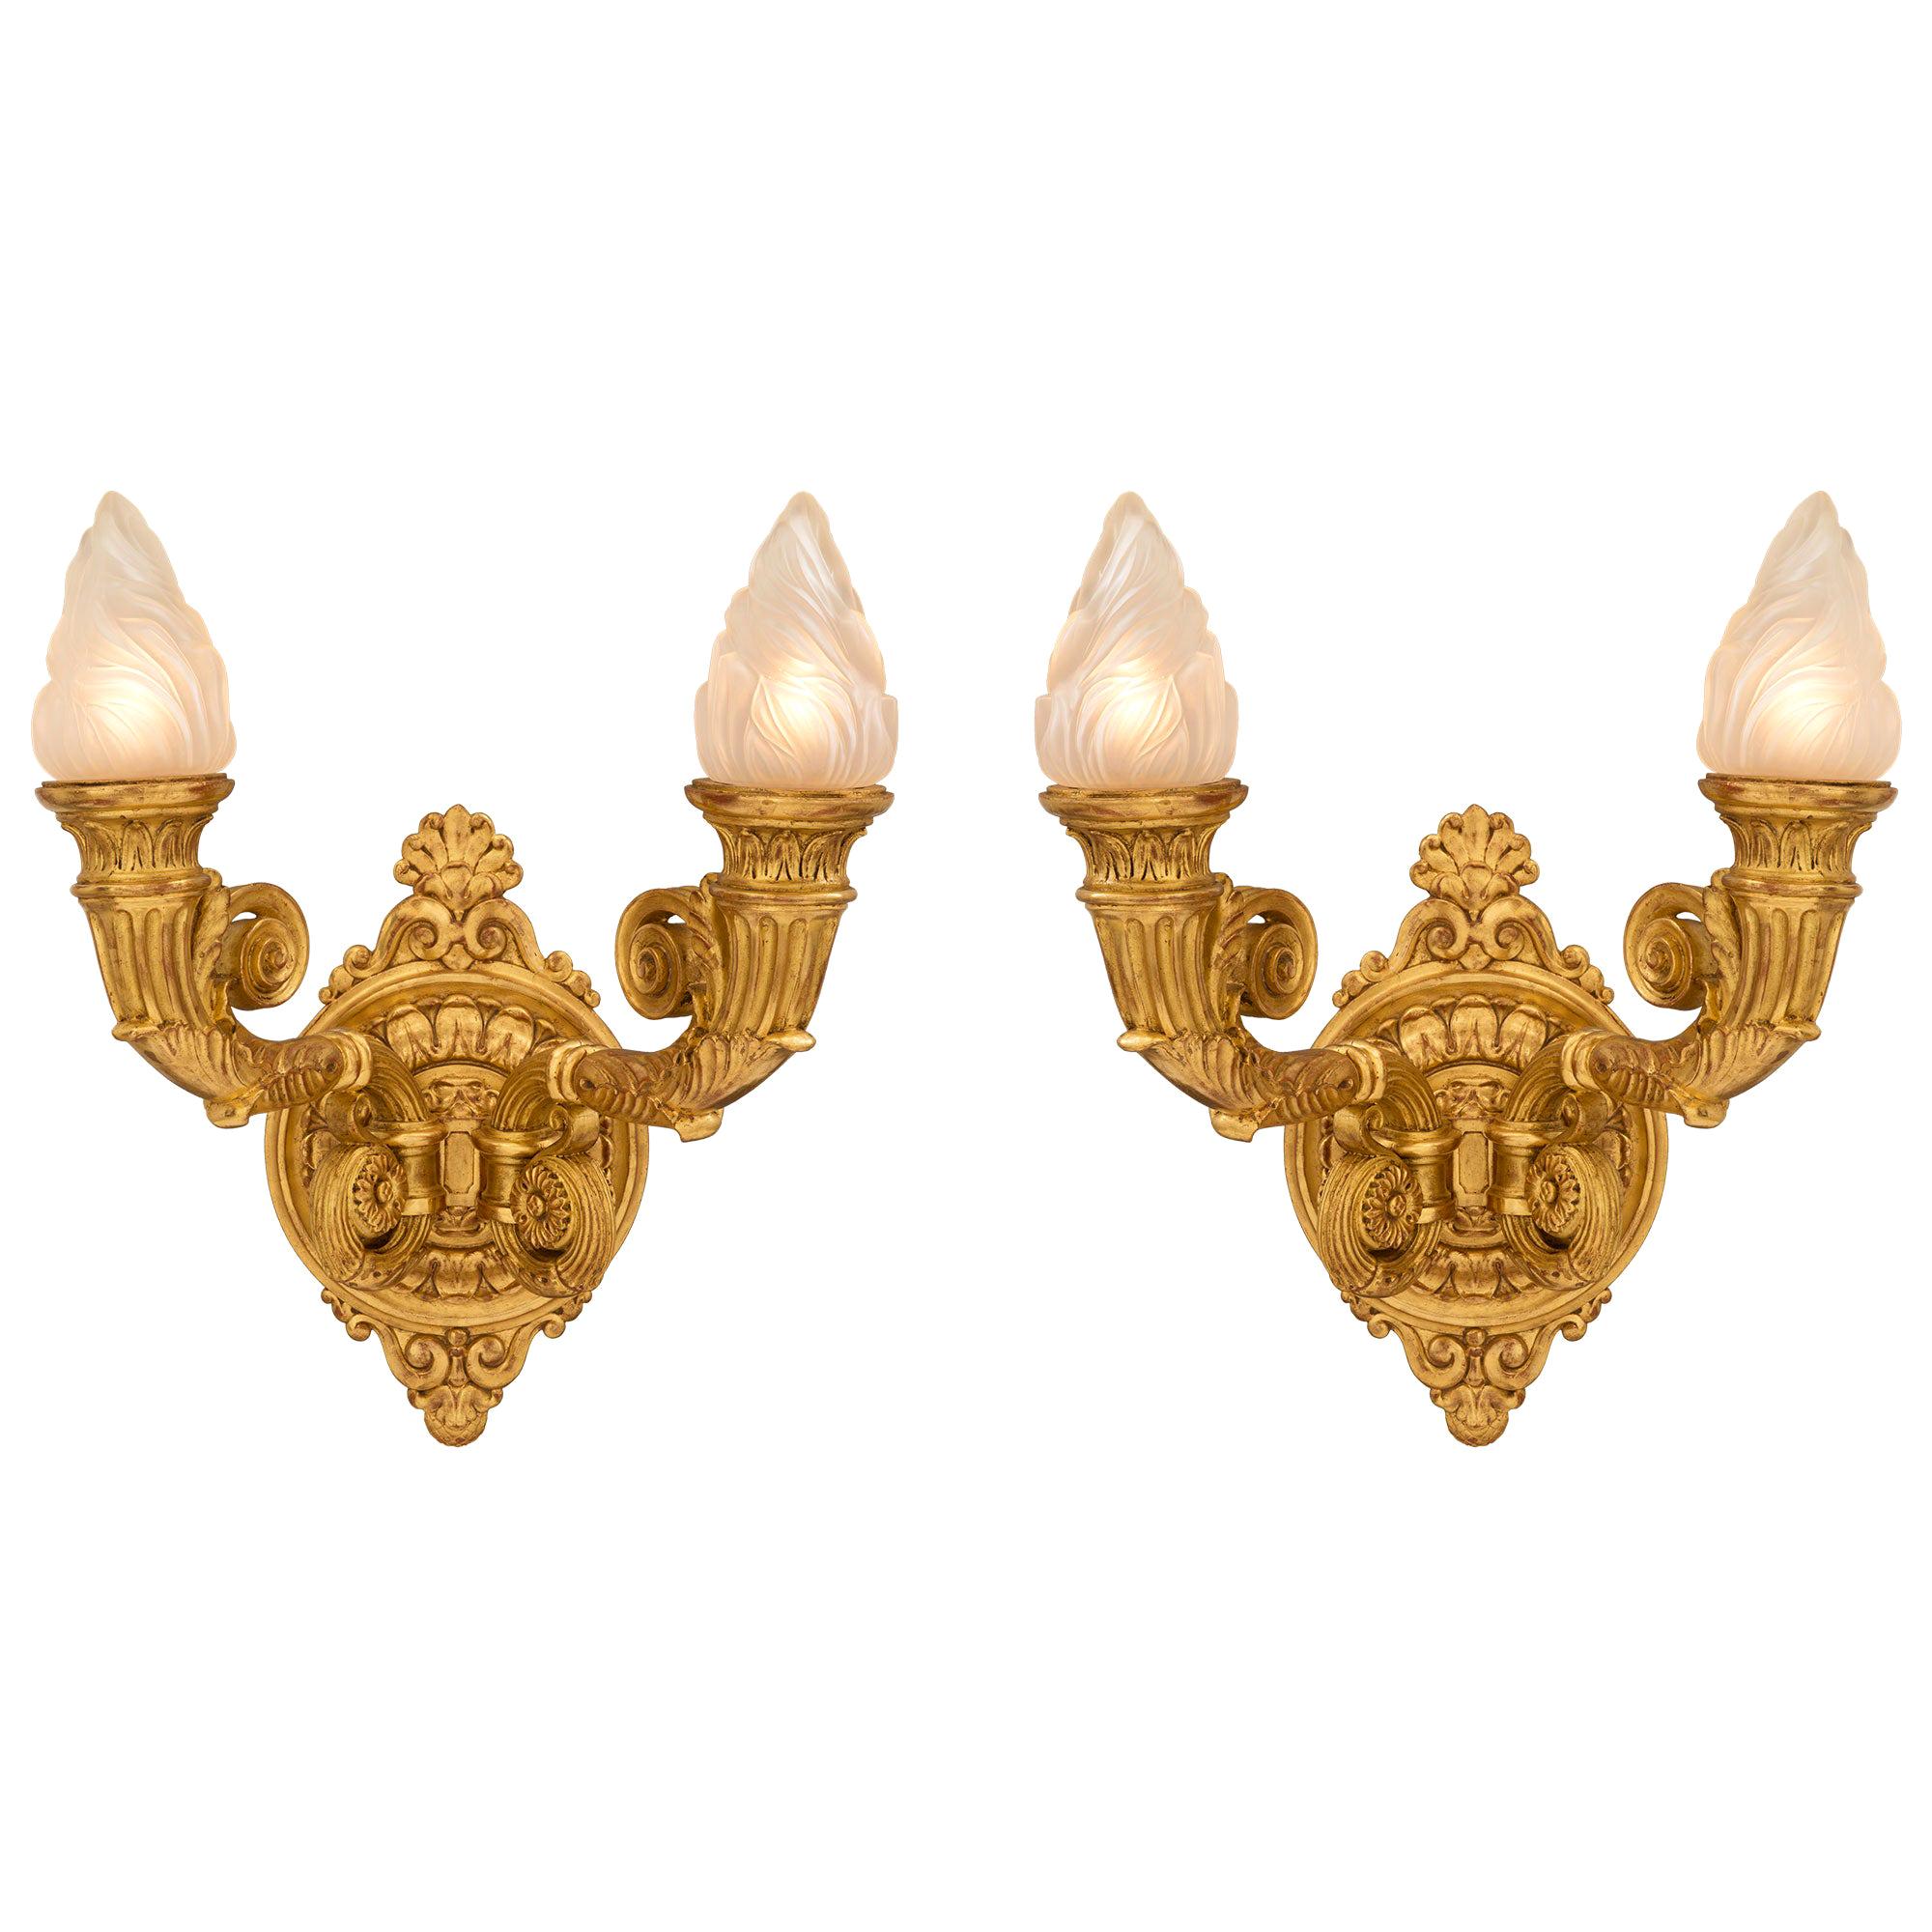 Pair of Italian 19th Century Neoclassical St. Giltwood Bras De Lumiere Sconces For Sale